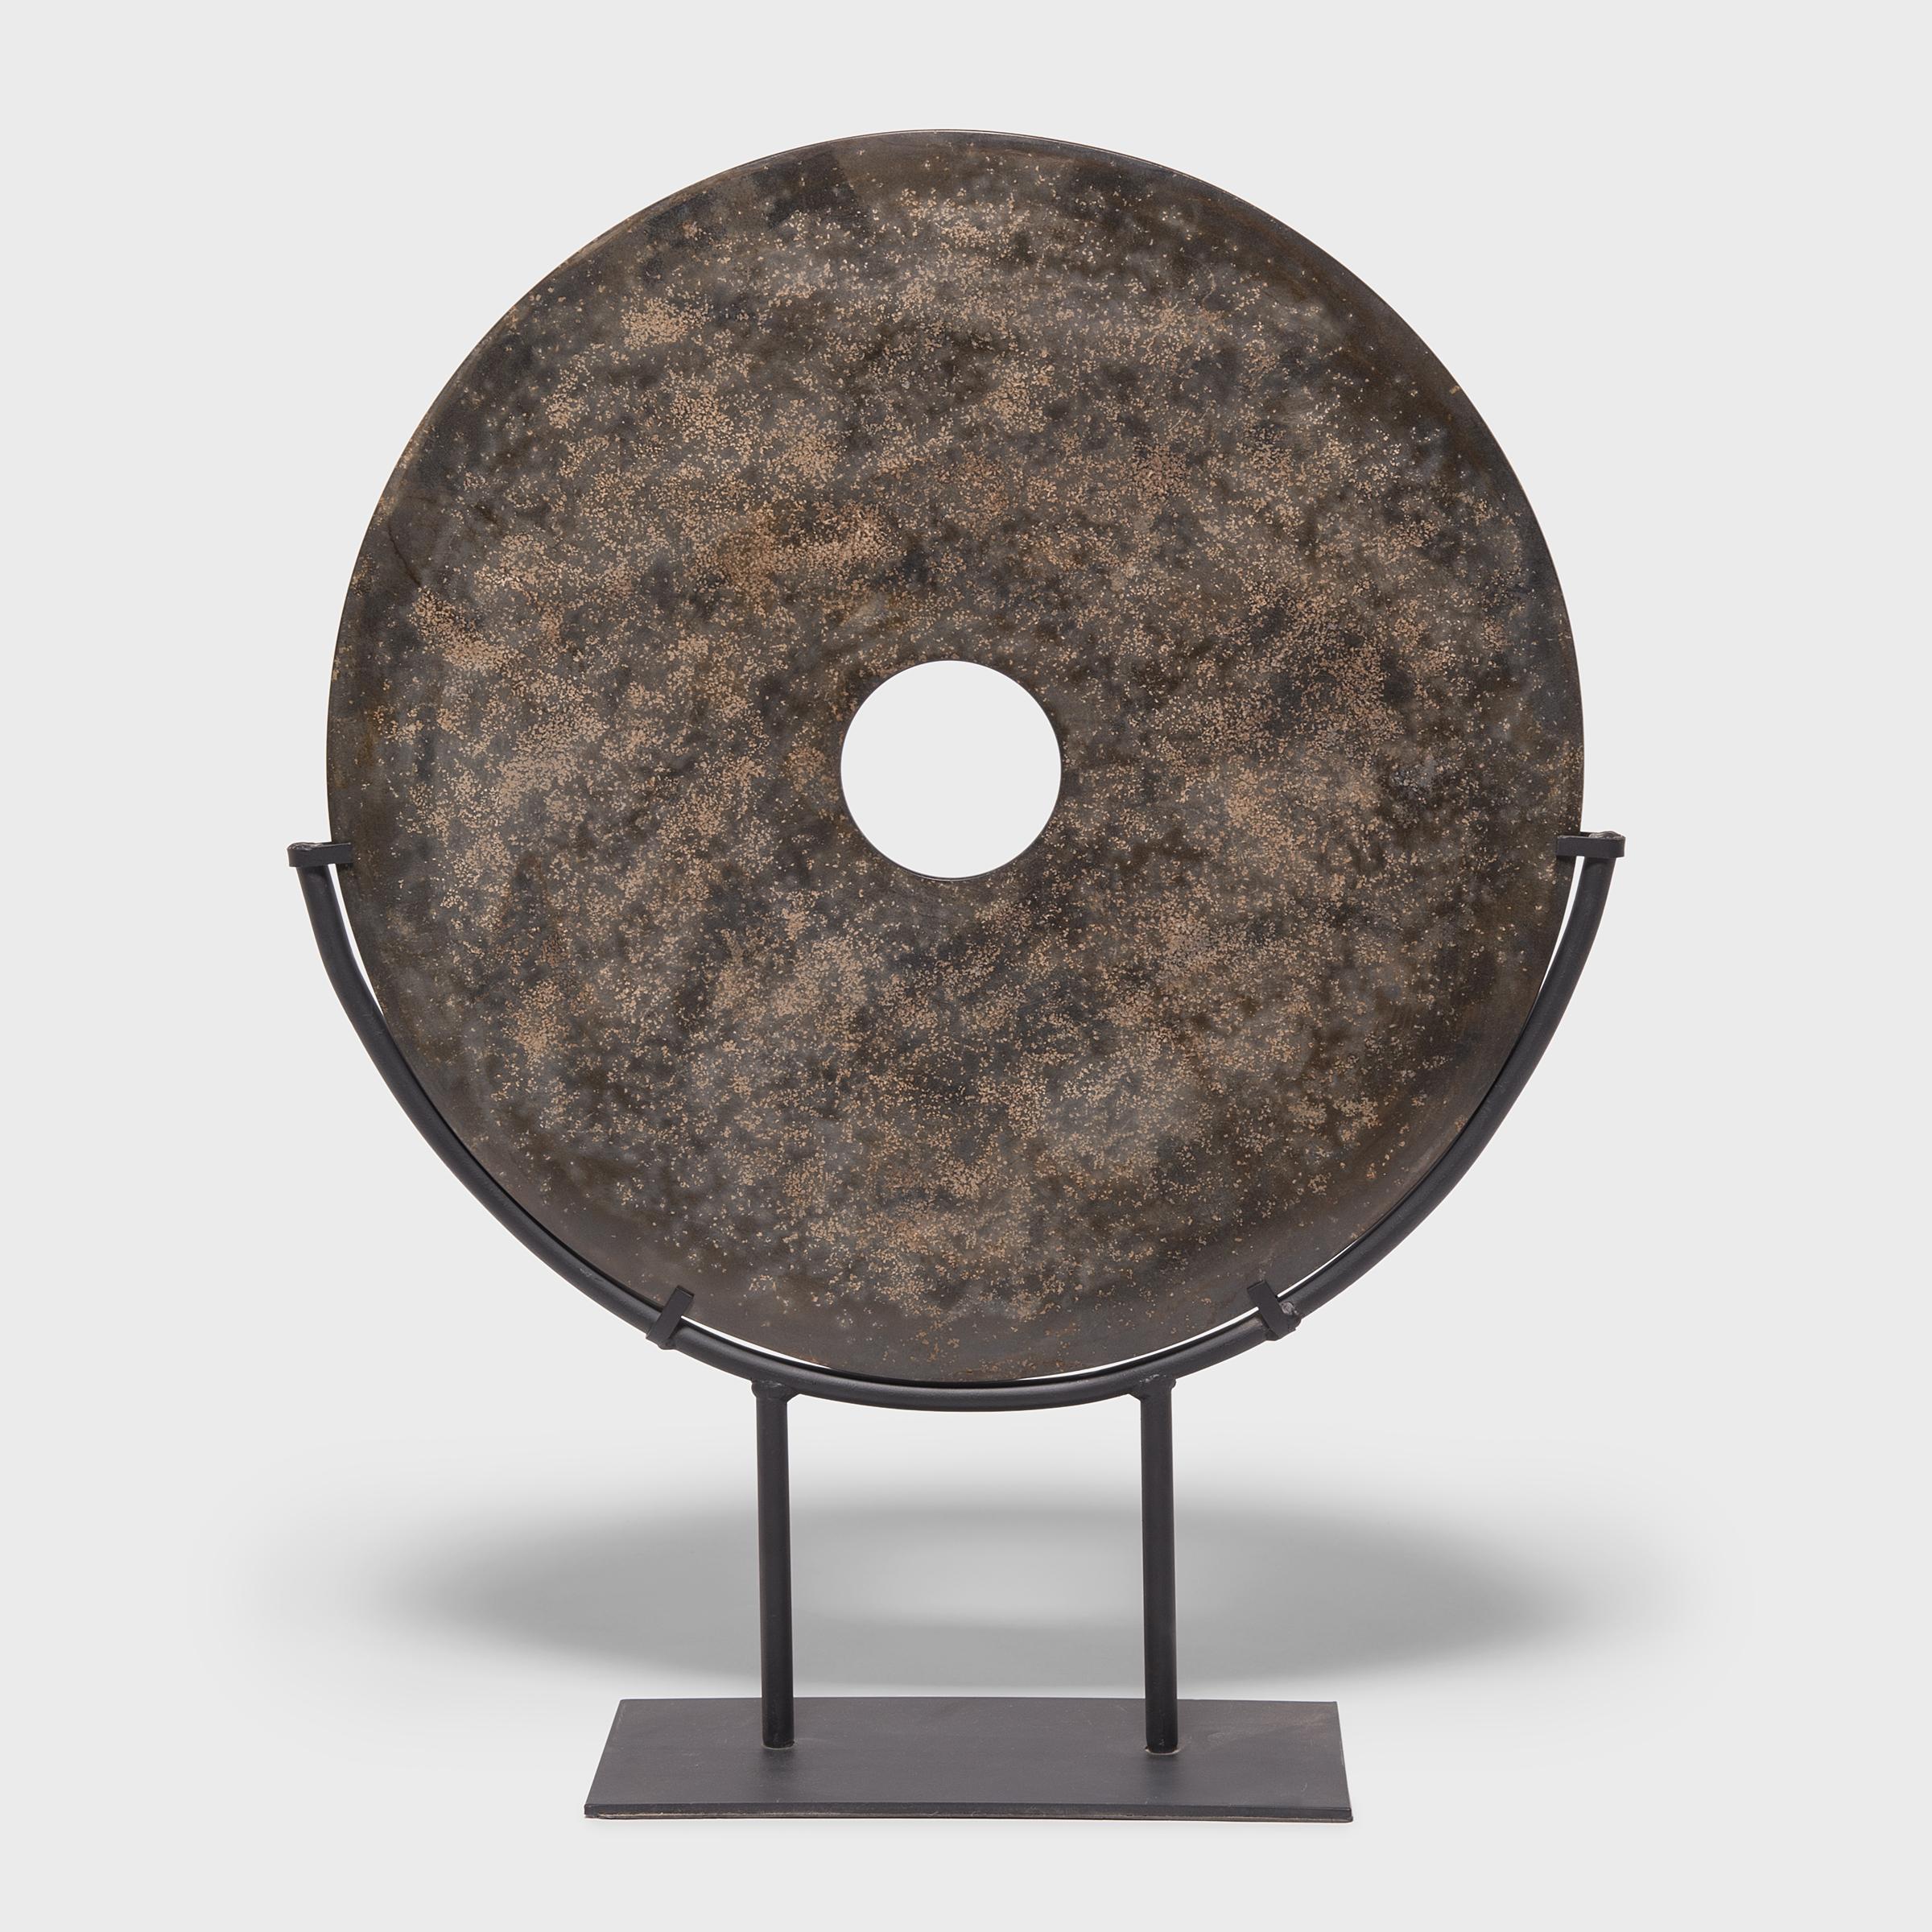 Found in the tombs of ancient Chinese emperors and aristocrats, bi discs such as this have a mysterious and spiritual history, and their function and significance remain unknown. Shaping this hard stone takes considerable skill. An artisan patiently